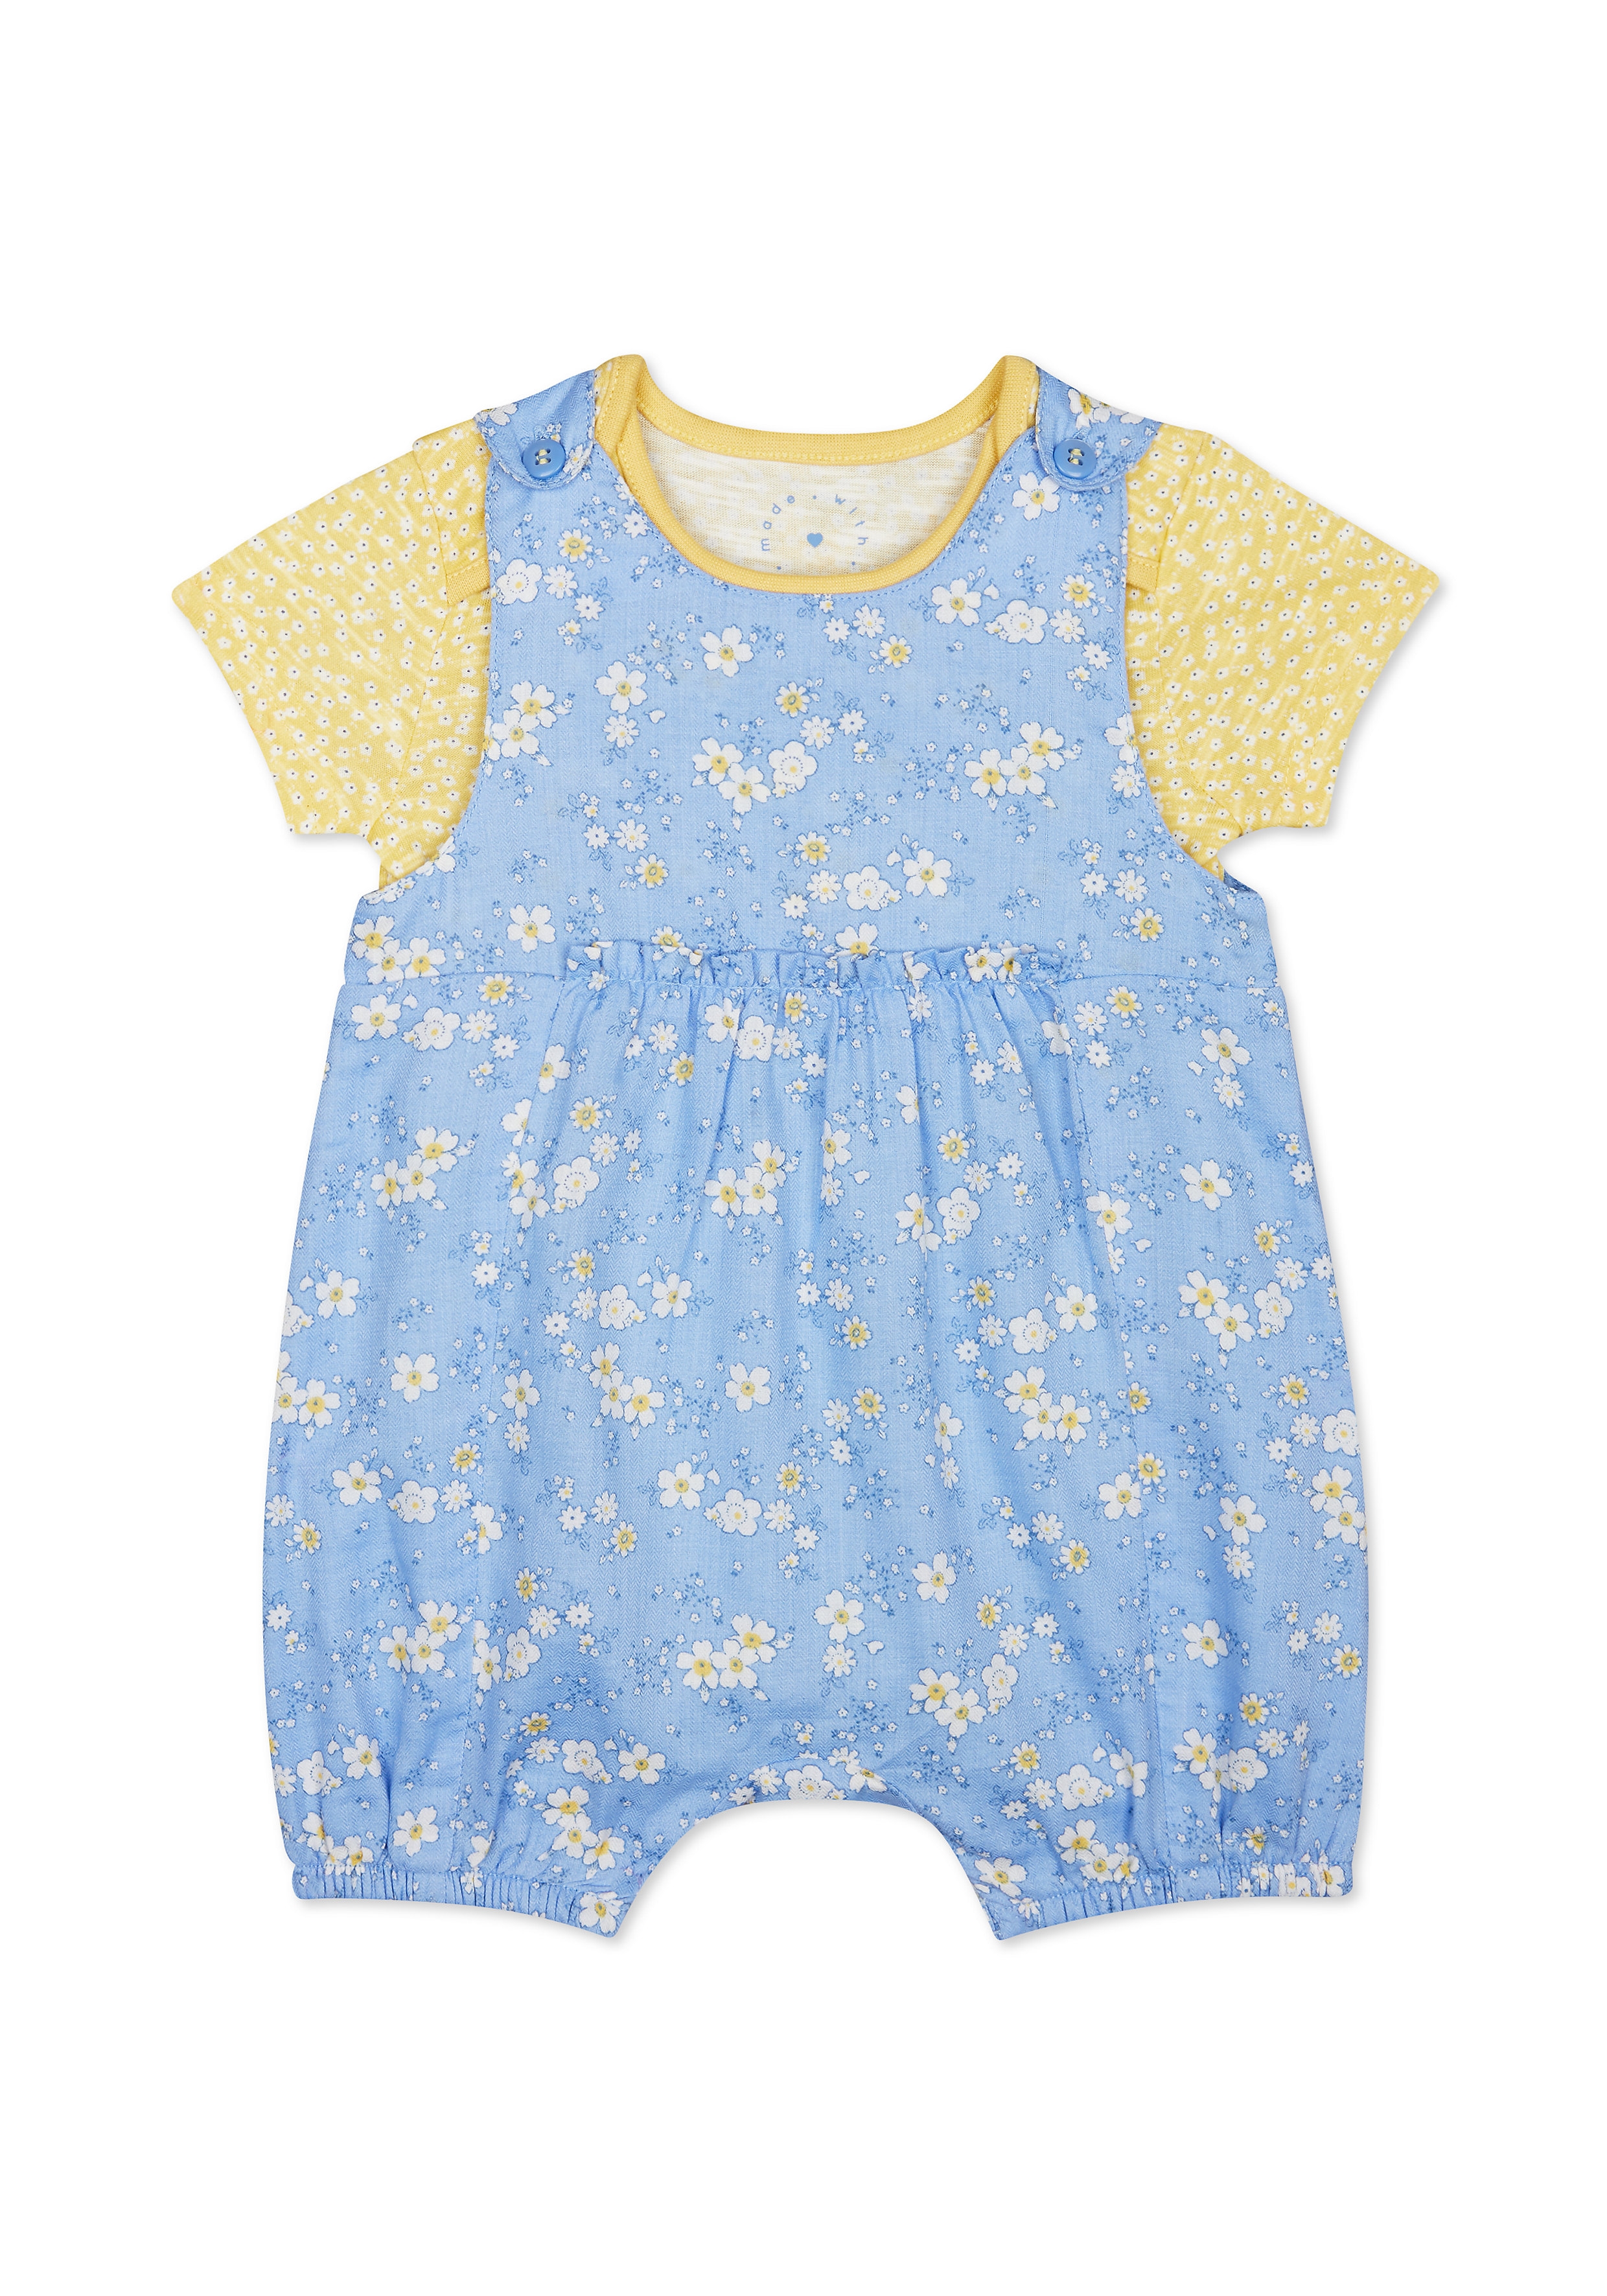 Mothercare | Girls Half Sleeves Dungaree Set Floral Print - Blue Yellow 0